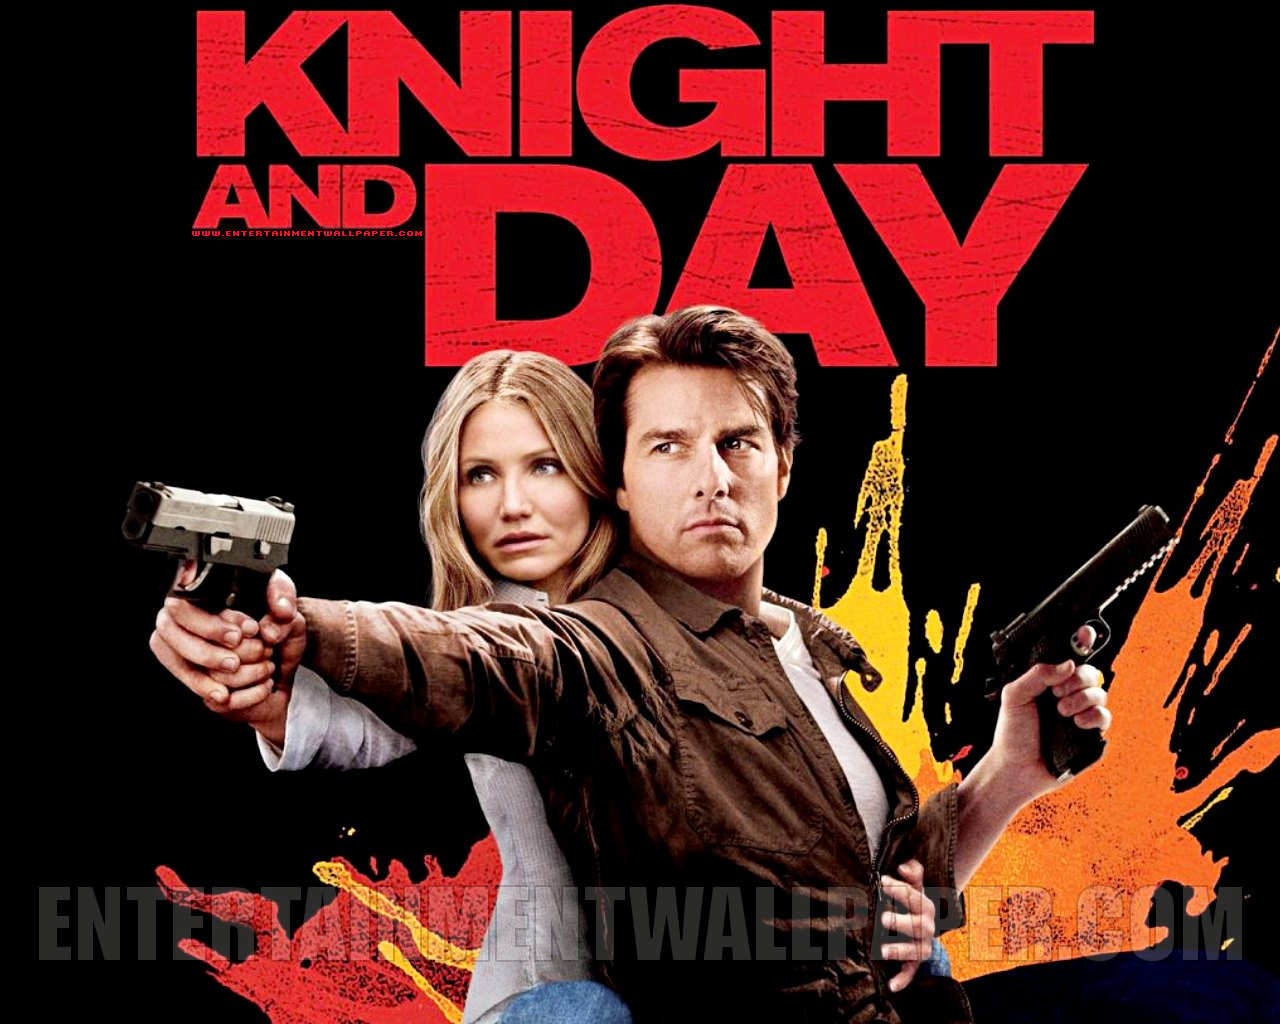 Knight And Day #9